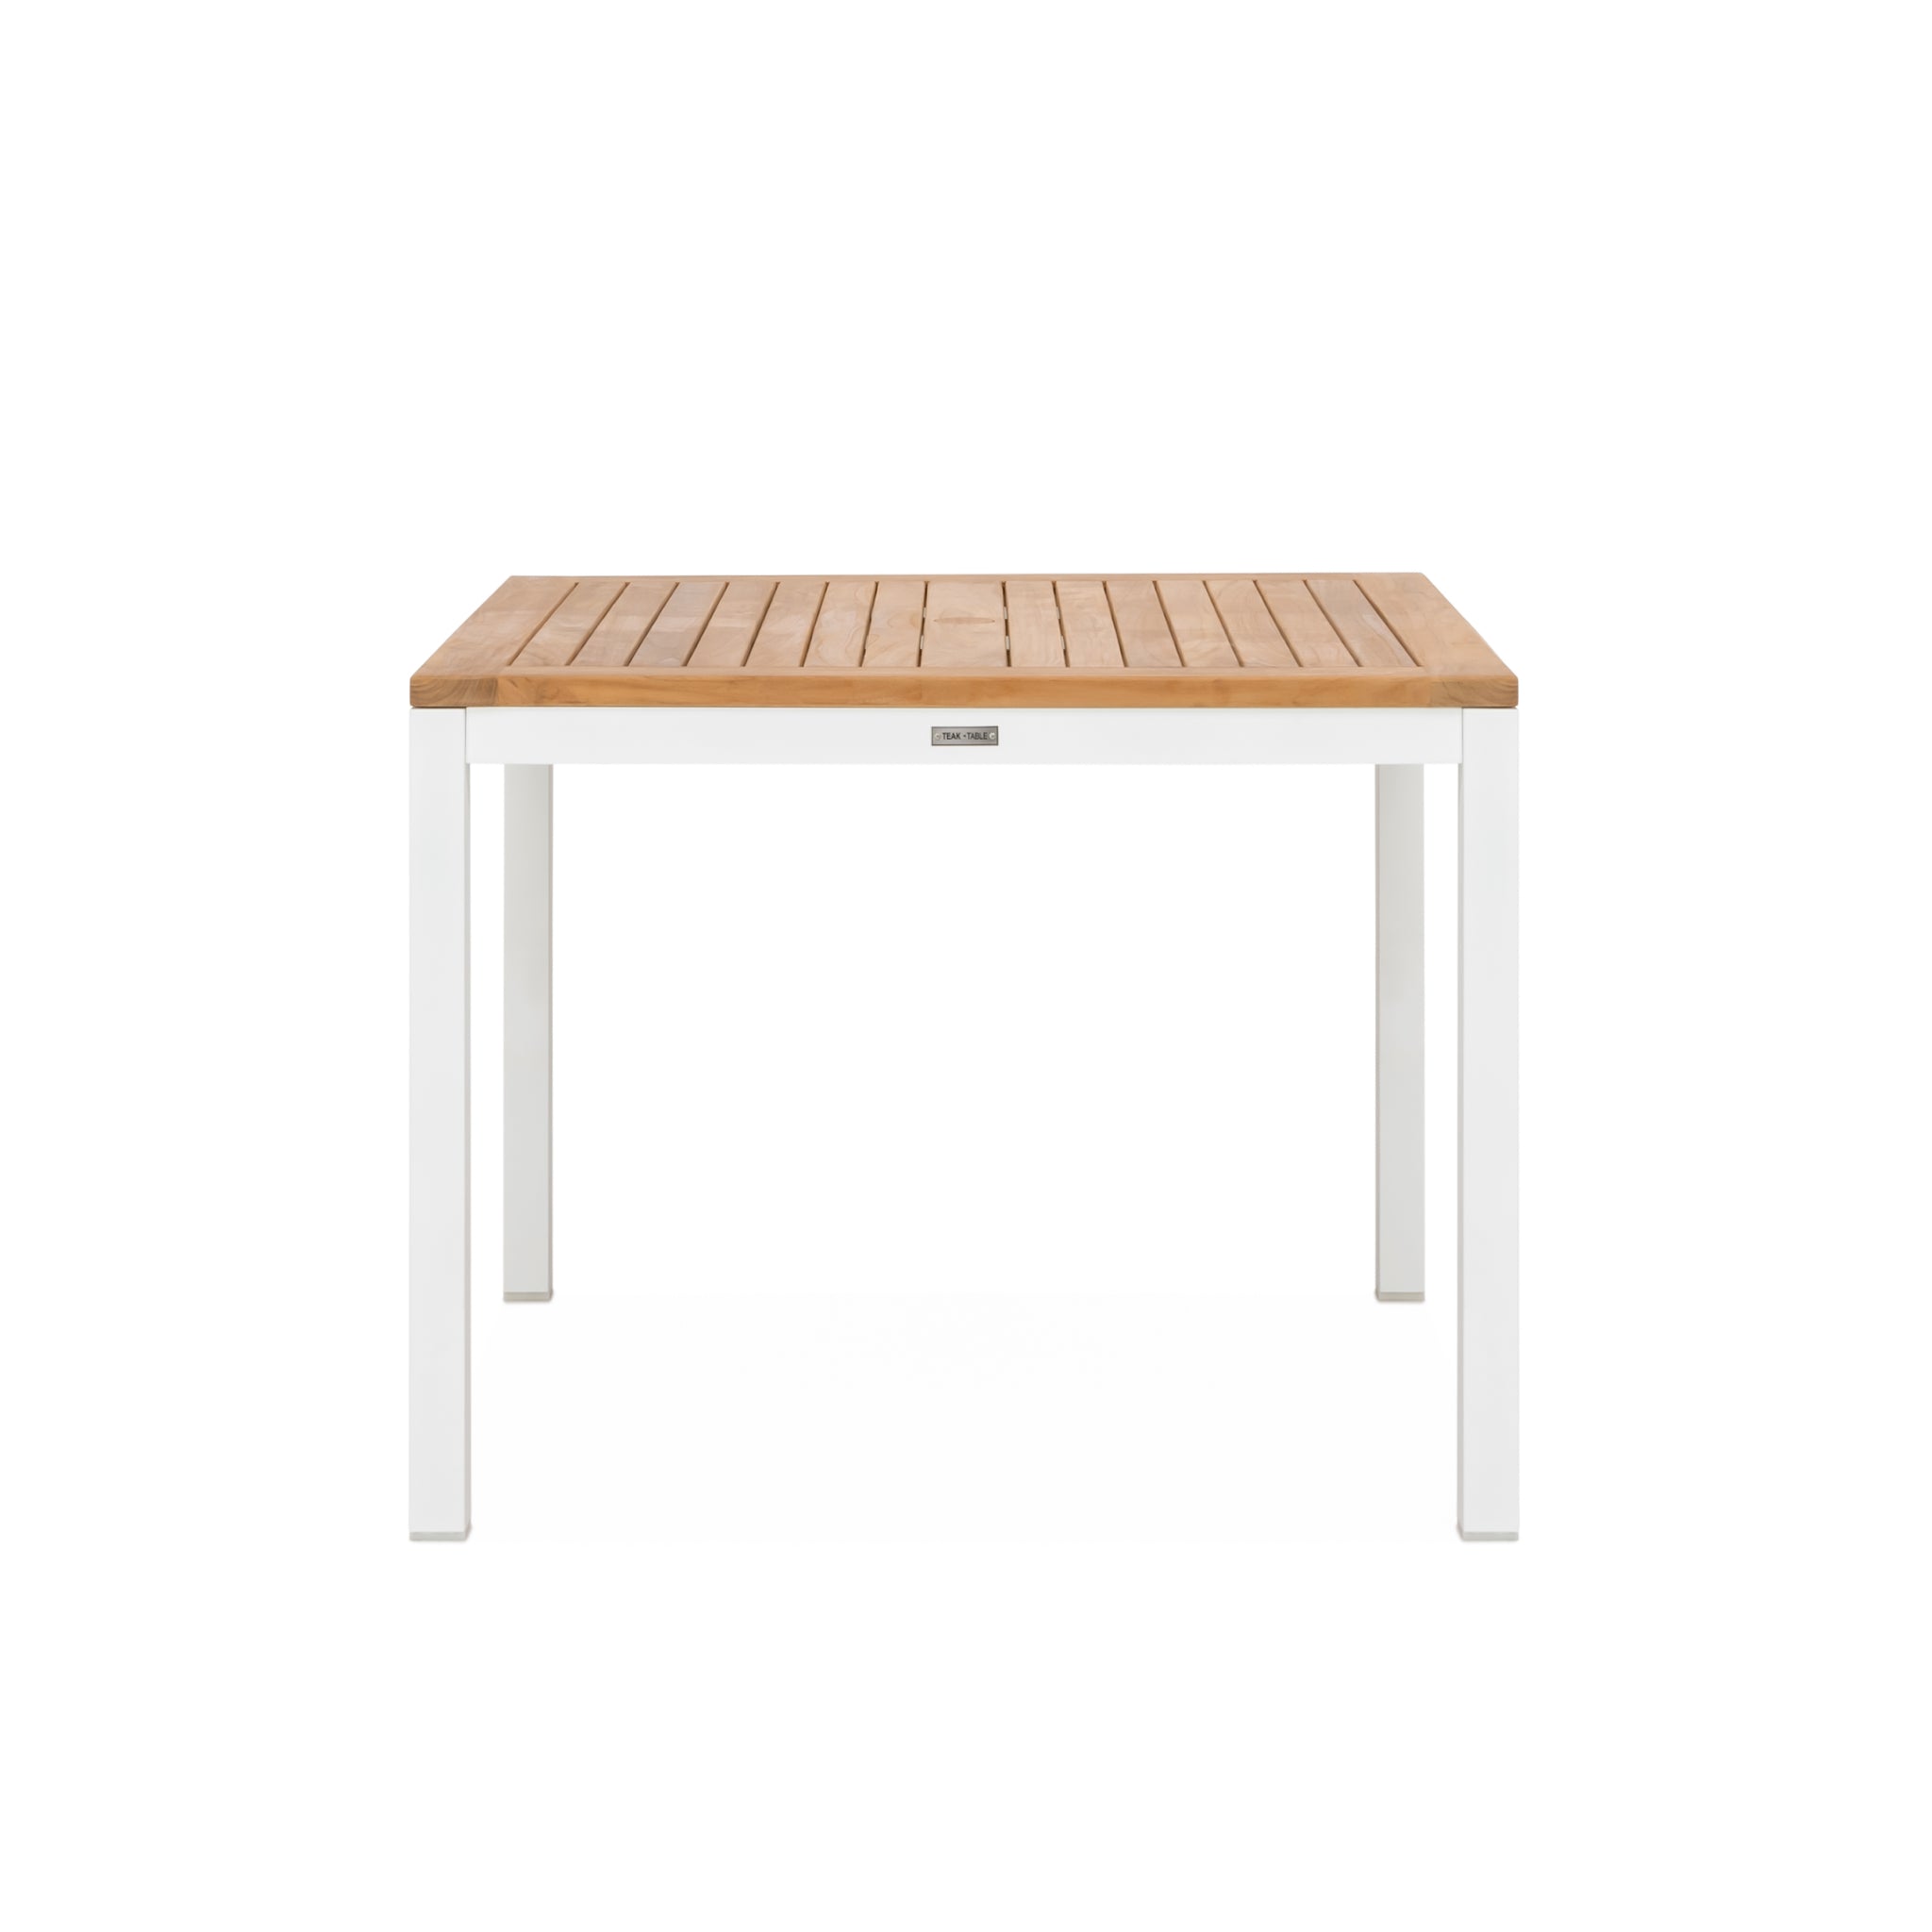 Barts 40" Table – Teak + Table Outdoor